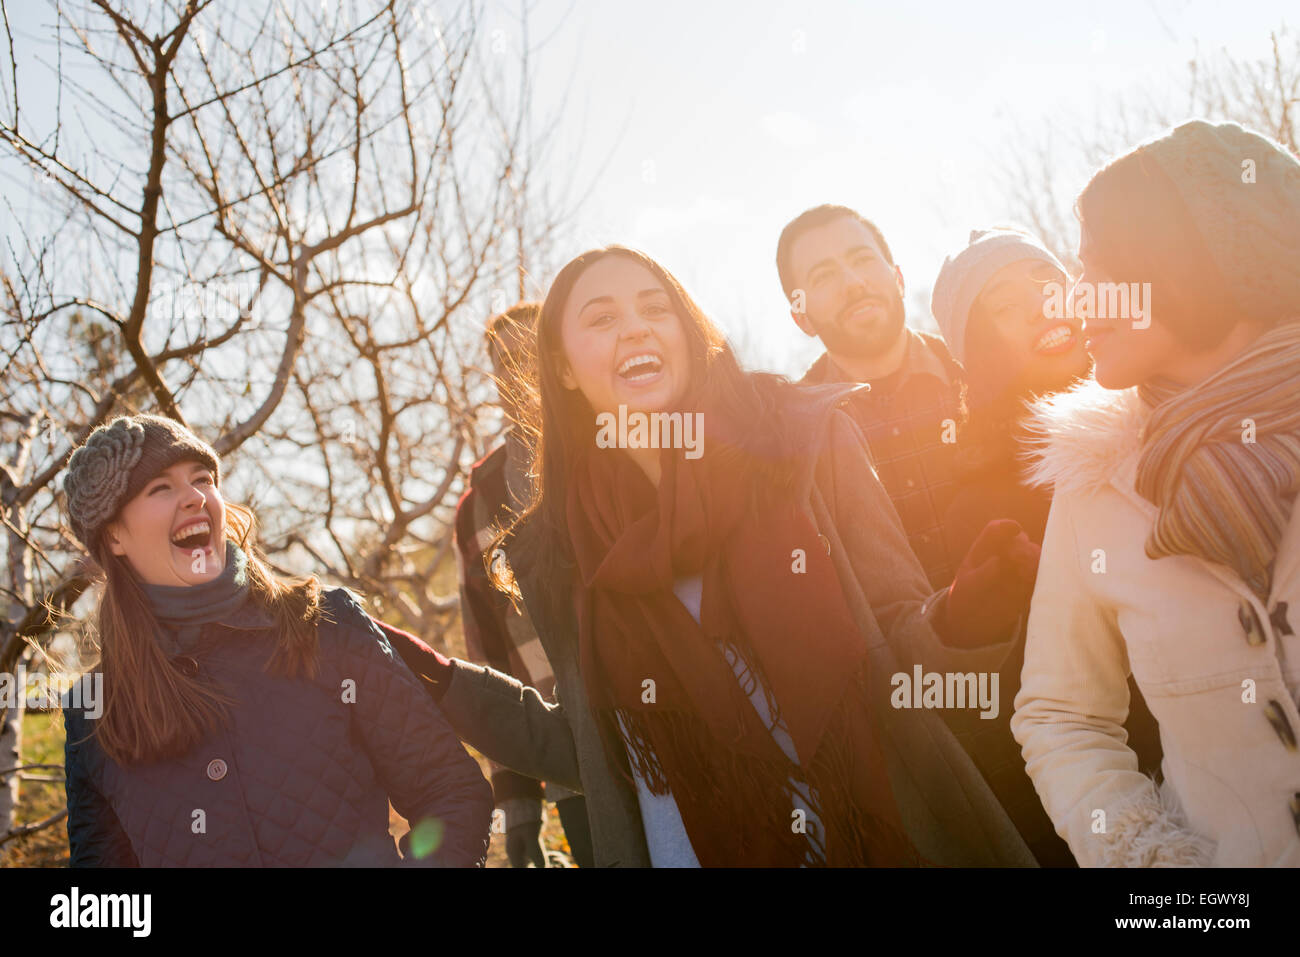 A group of friends on a winter walk. Stock Photo